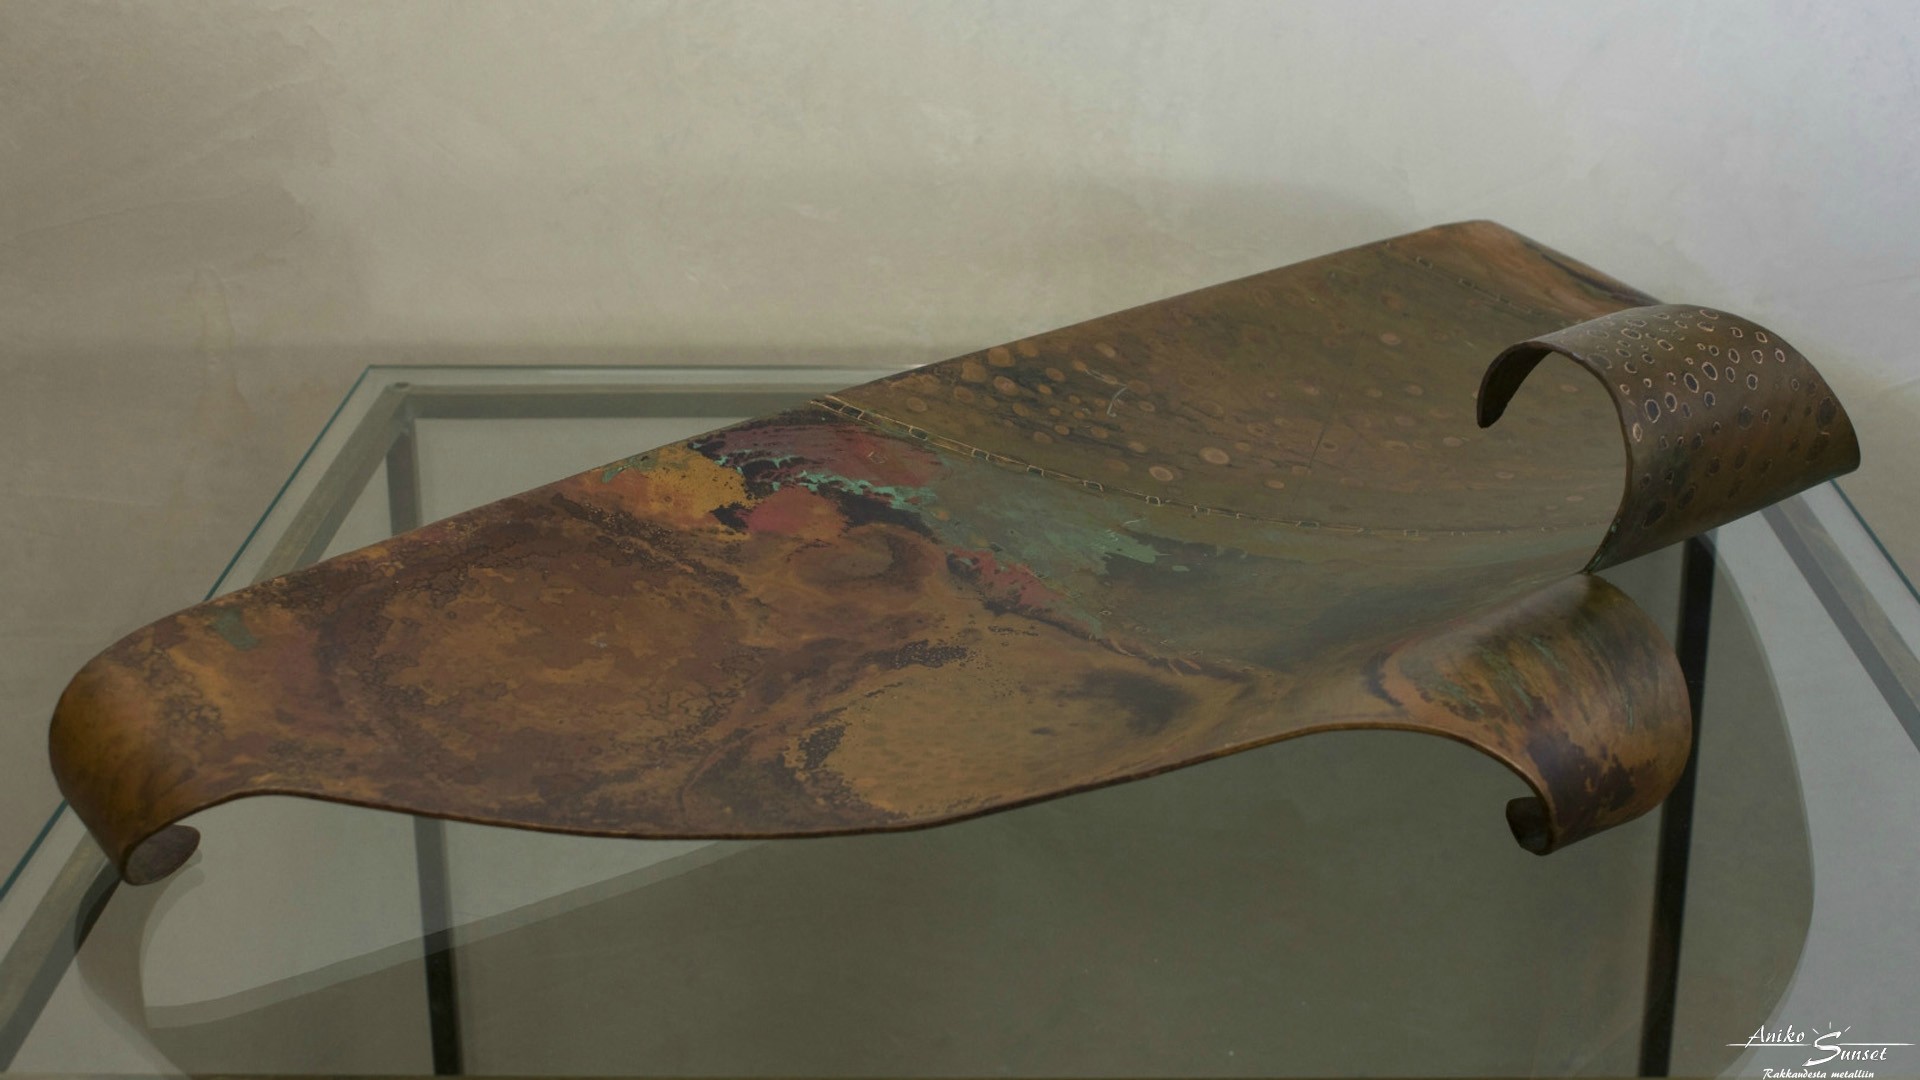 Platter "Ray" - 2 mm copper sheet patinated using heat treatments, 580x260 mm